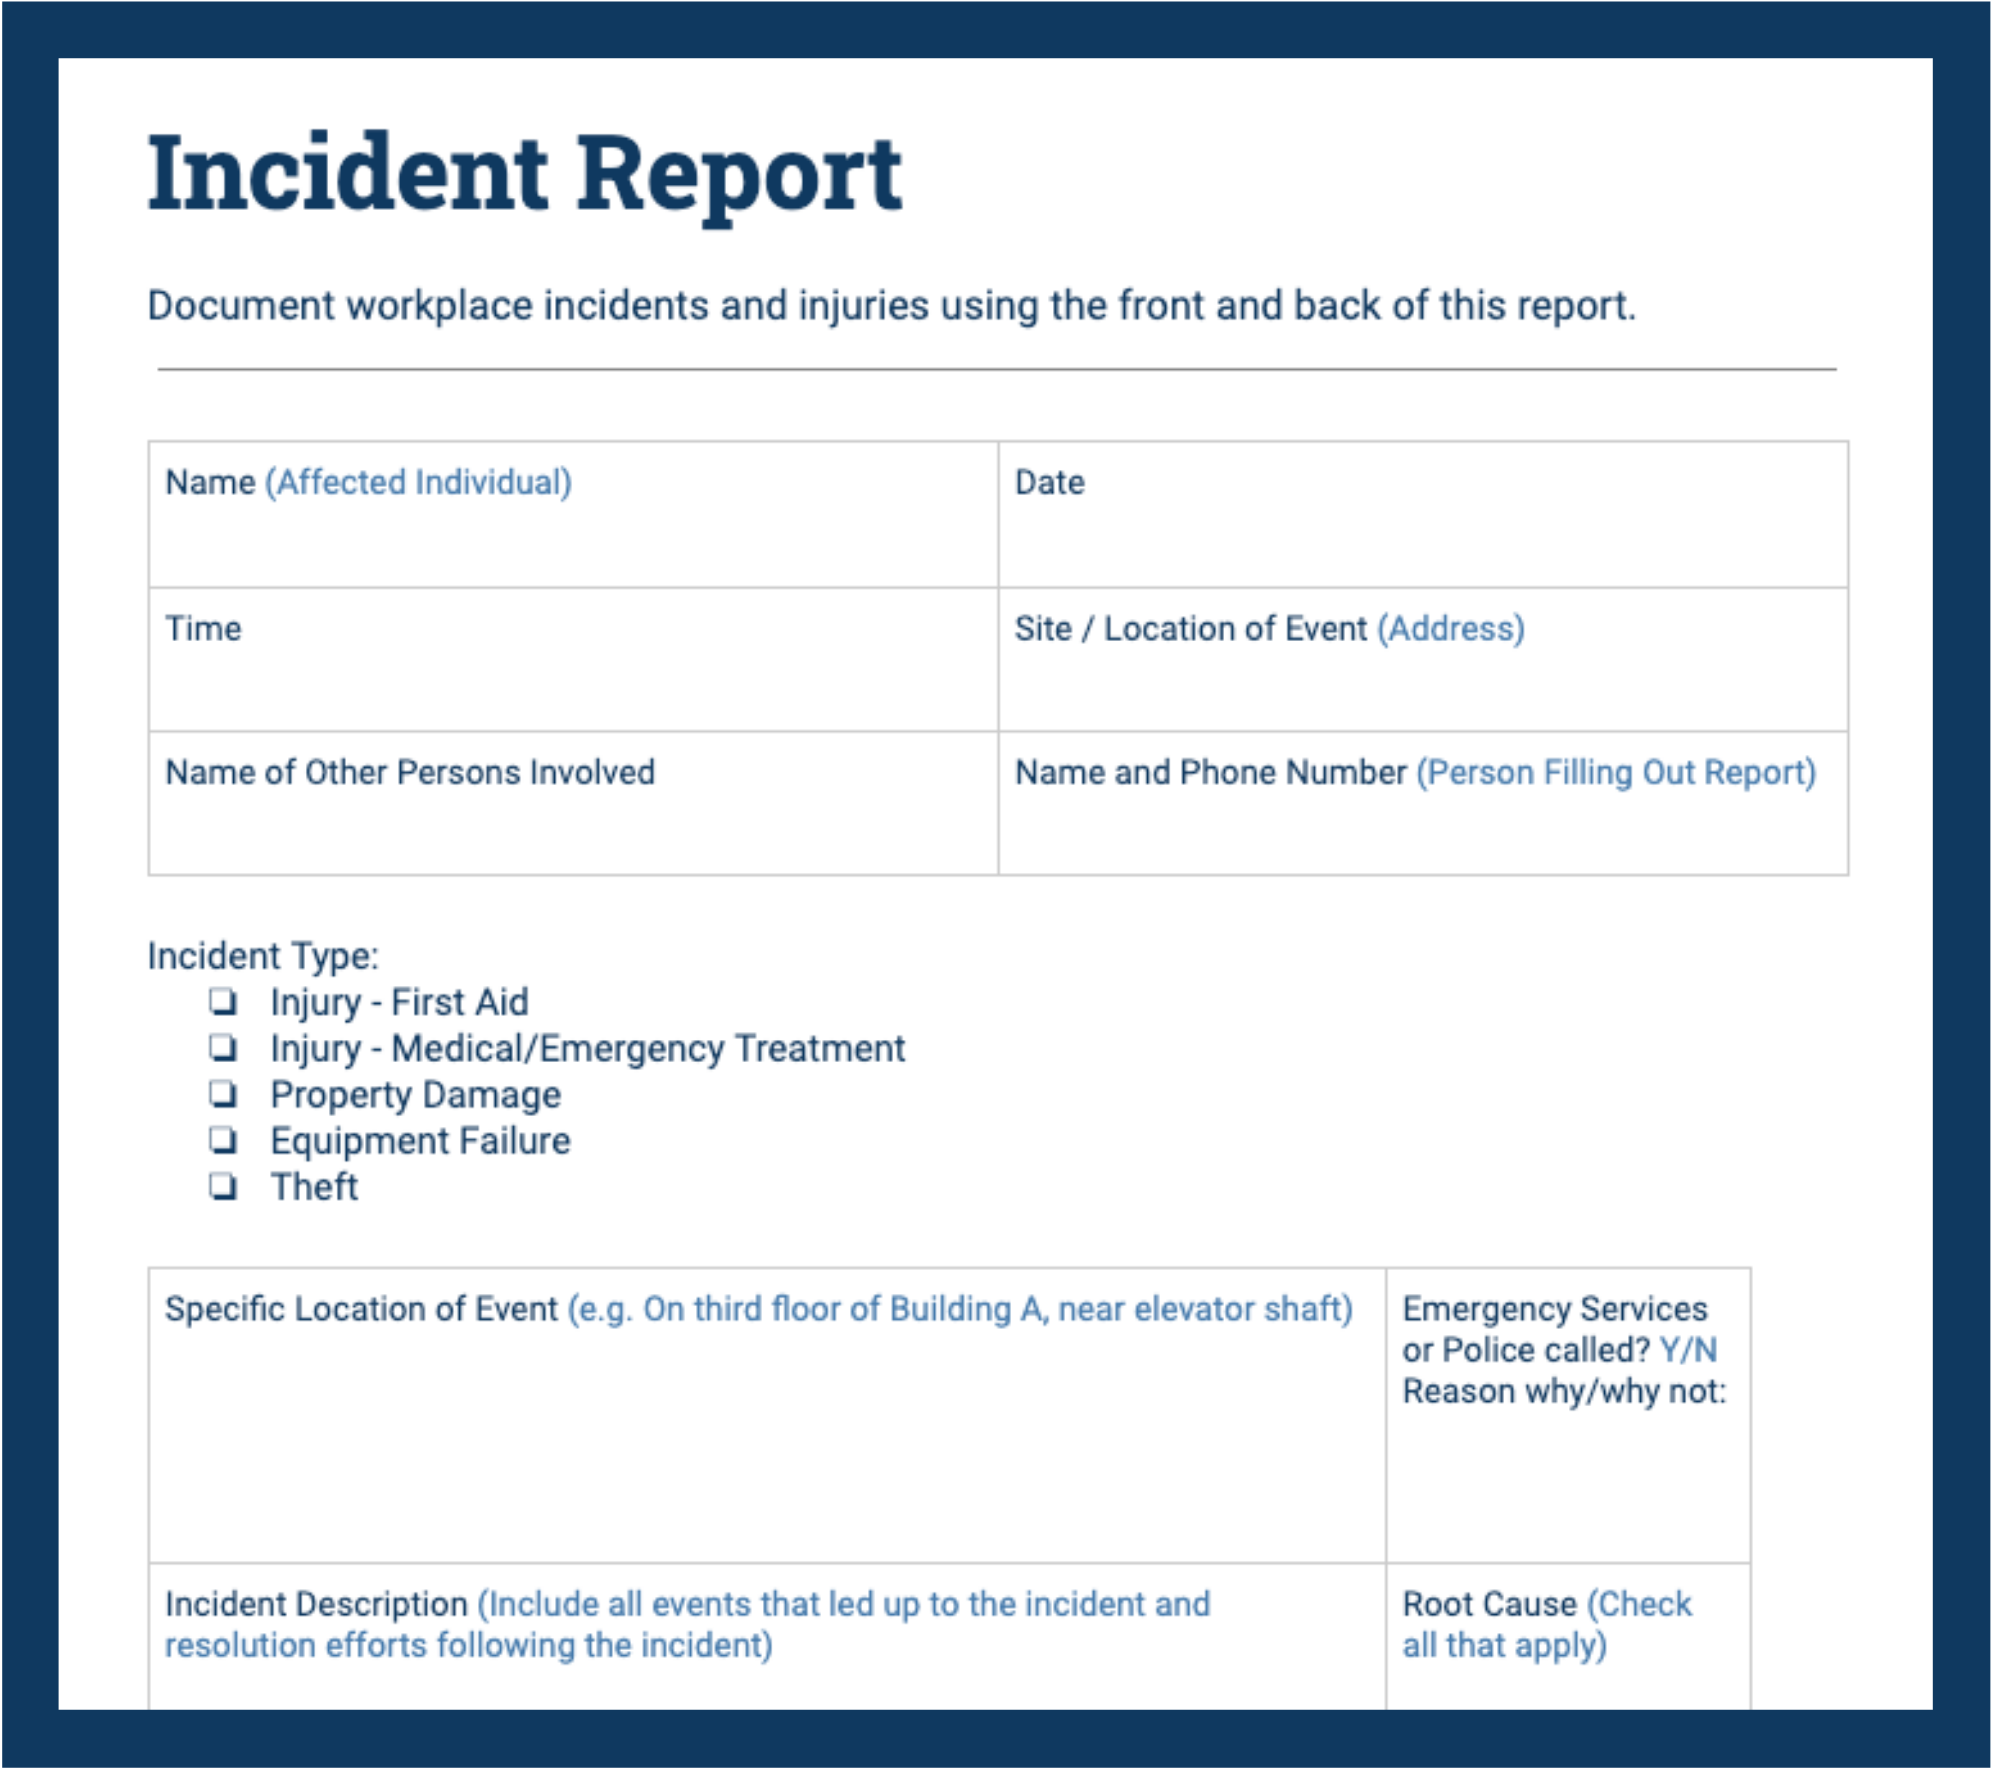 peerless-tips-about-incident-report-format-letter-general-professional